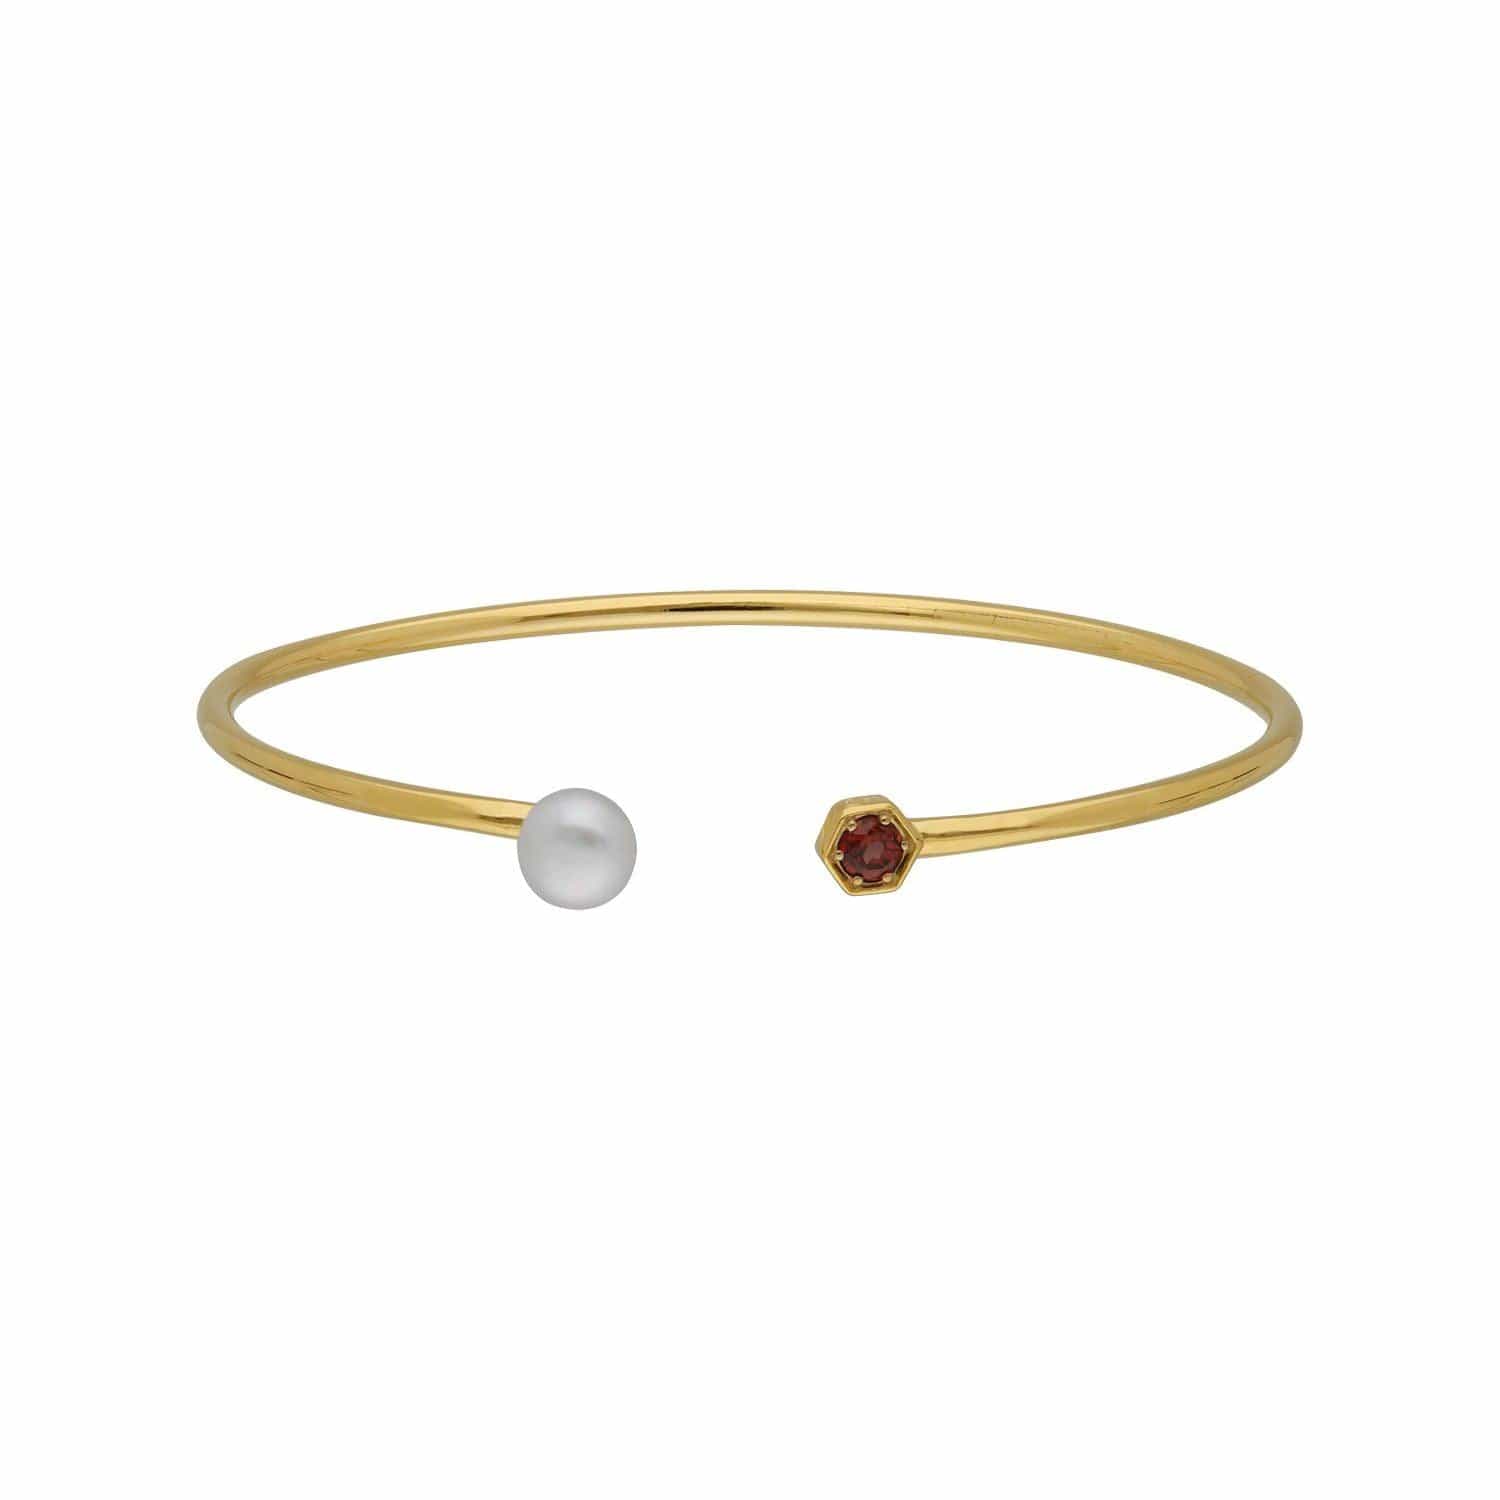 Geometric Pearl & Garnet Open Bangle in Gold Plated Sterling Silver